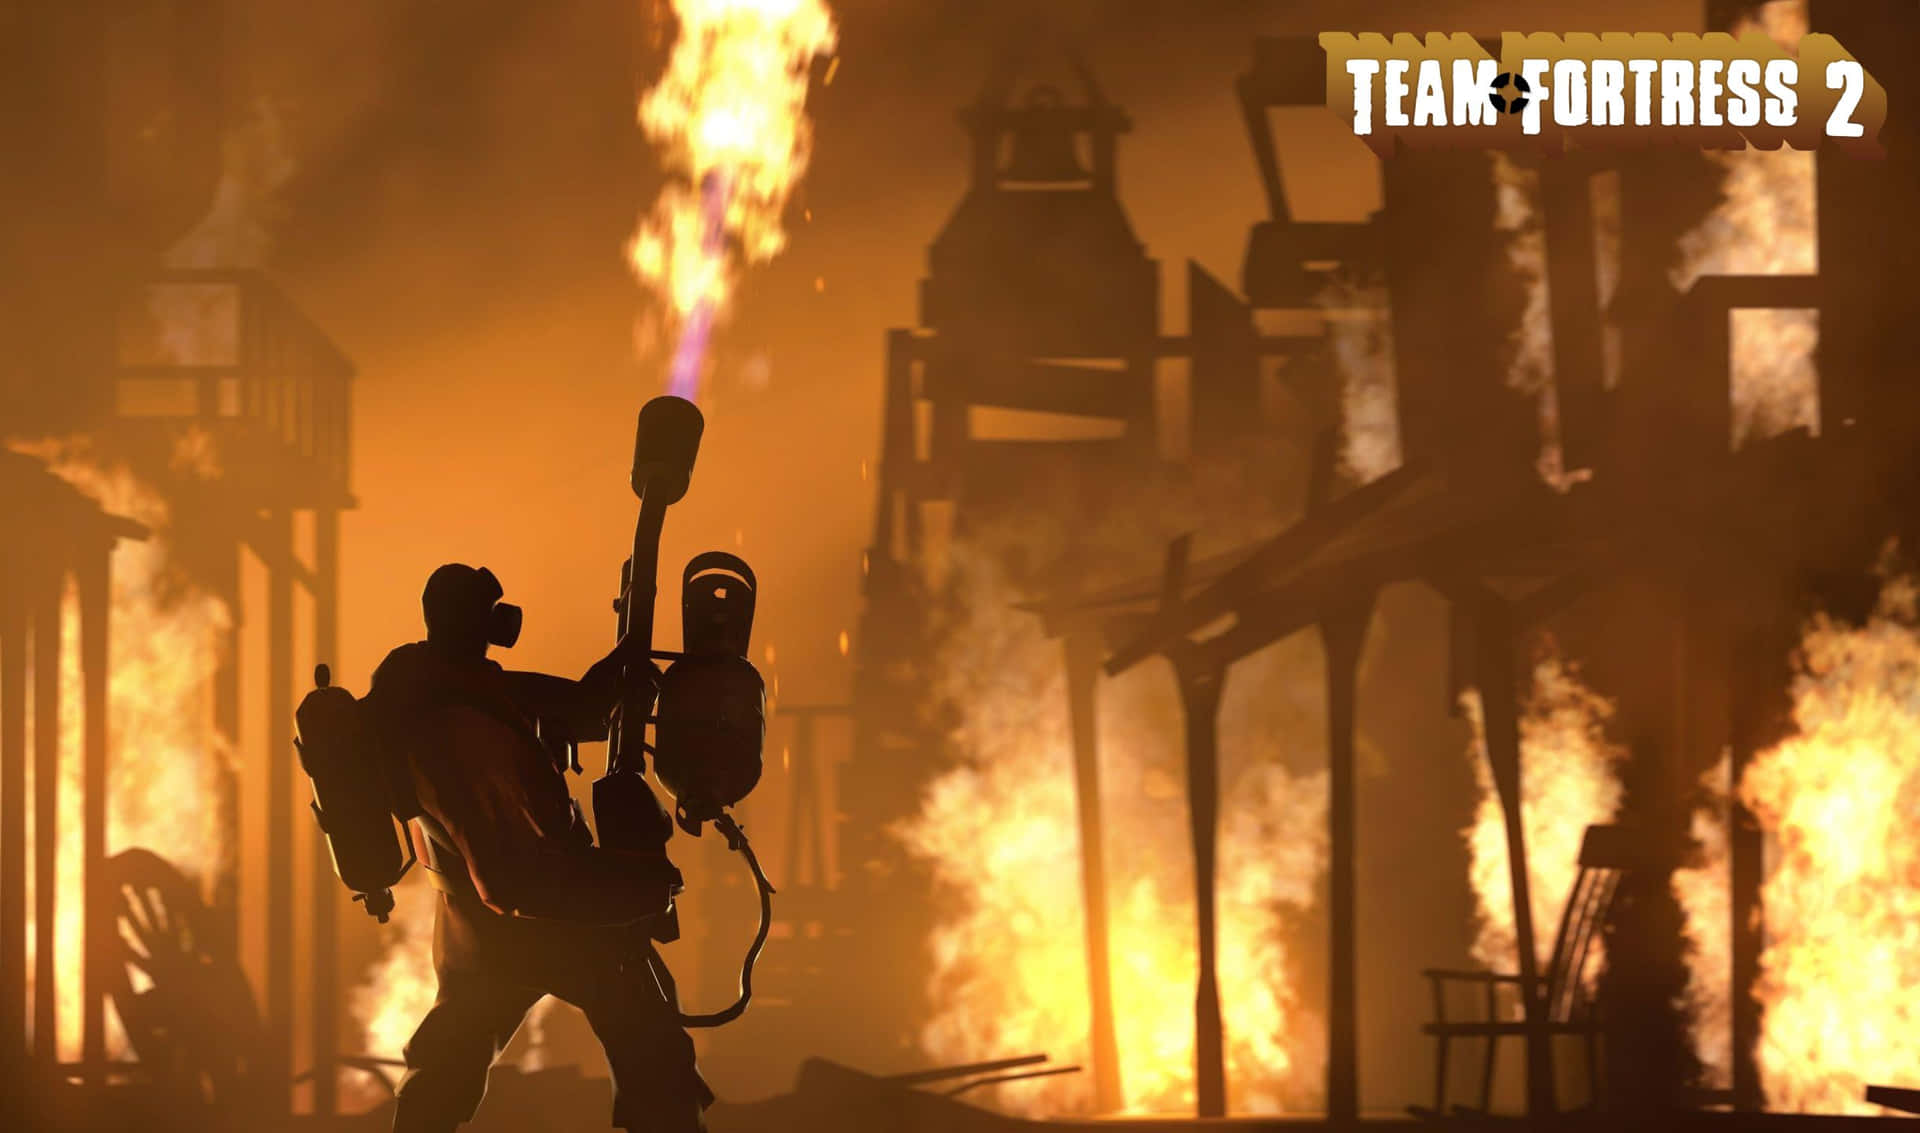 Team Fortress 2 Video Game 2440 x 1440 Background